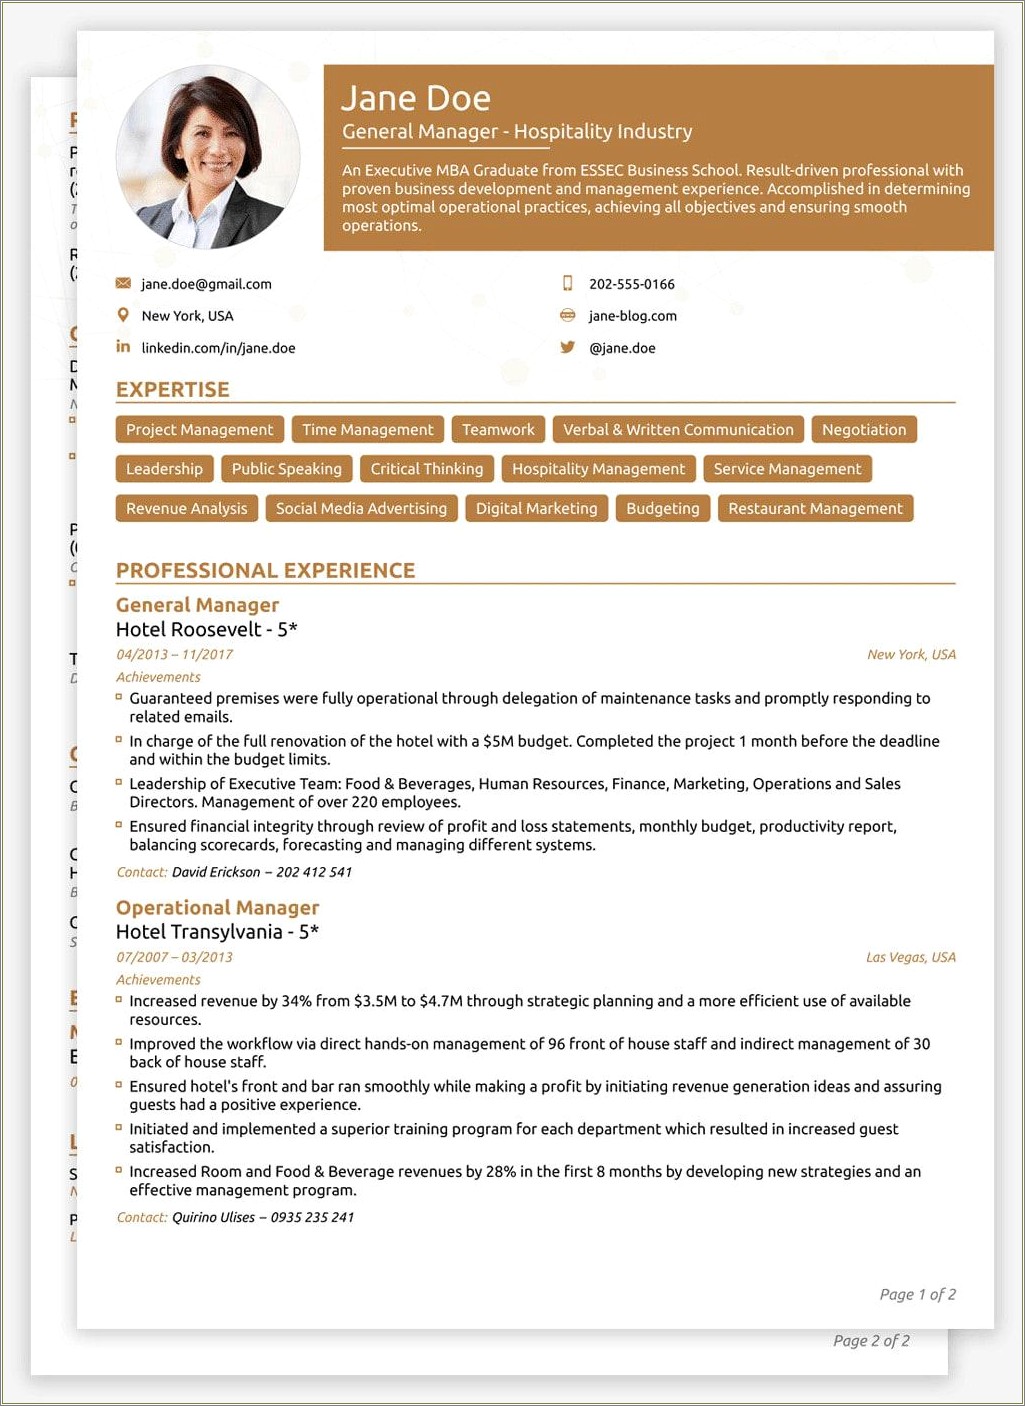 Resume And Cover Letter Phrase Book Pdf